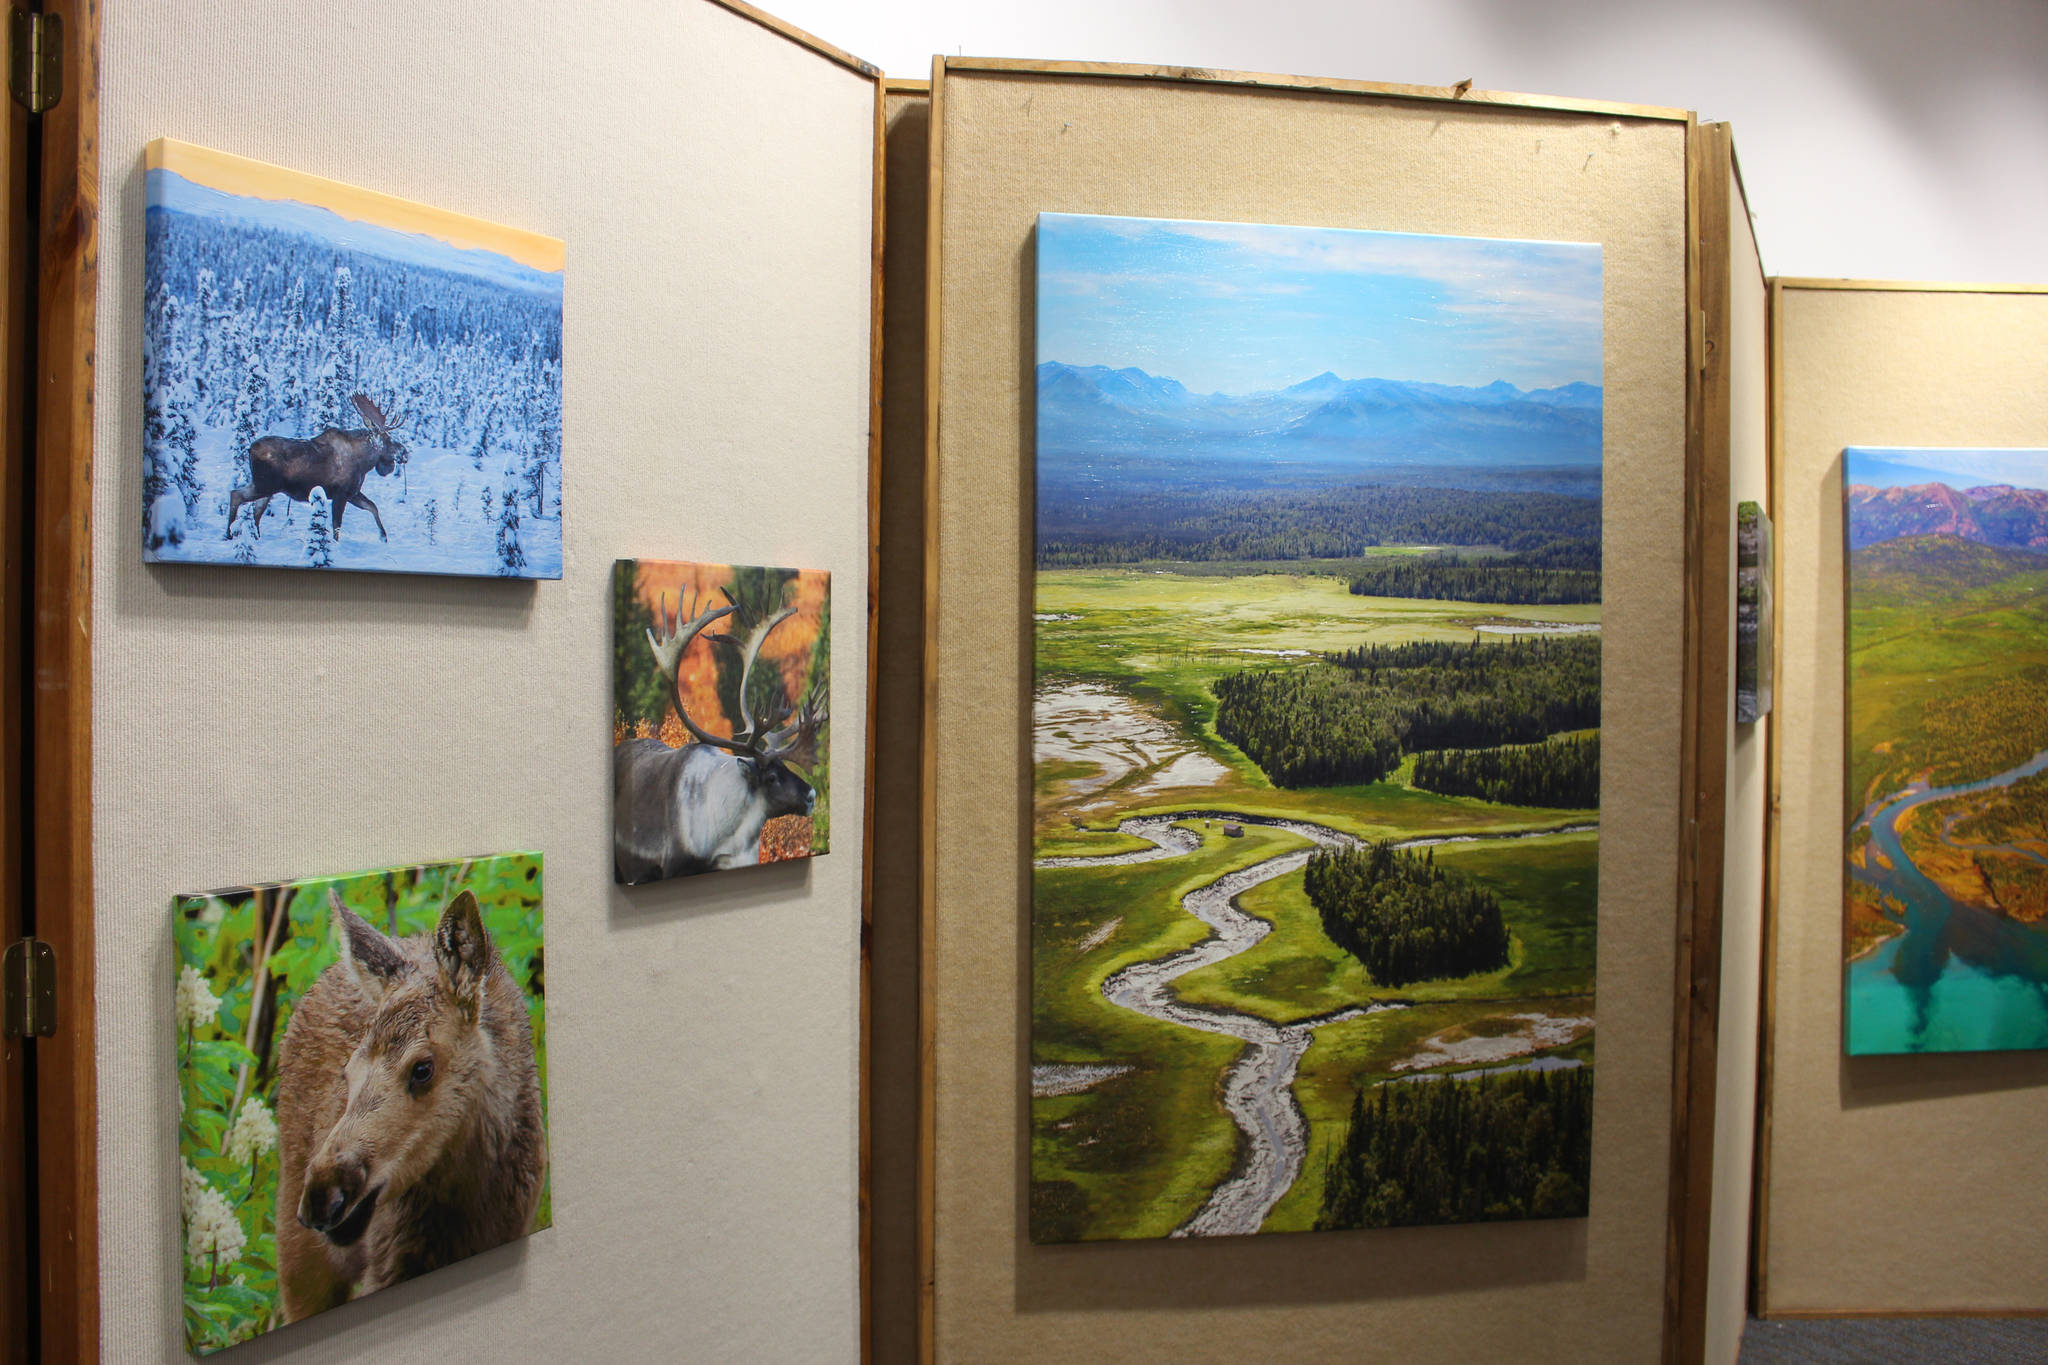 Photos by Brian Mazurek / Peninsula Clarion 
Photographs on canvas by Mary Frische and Tom Collopy are seen at the Kenai Visitor and Cultural Center on Tuesday.